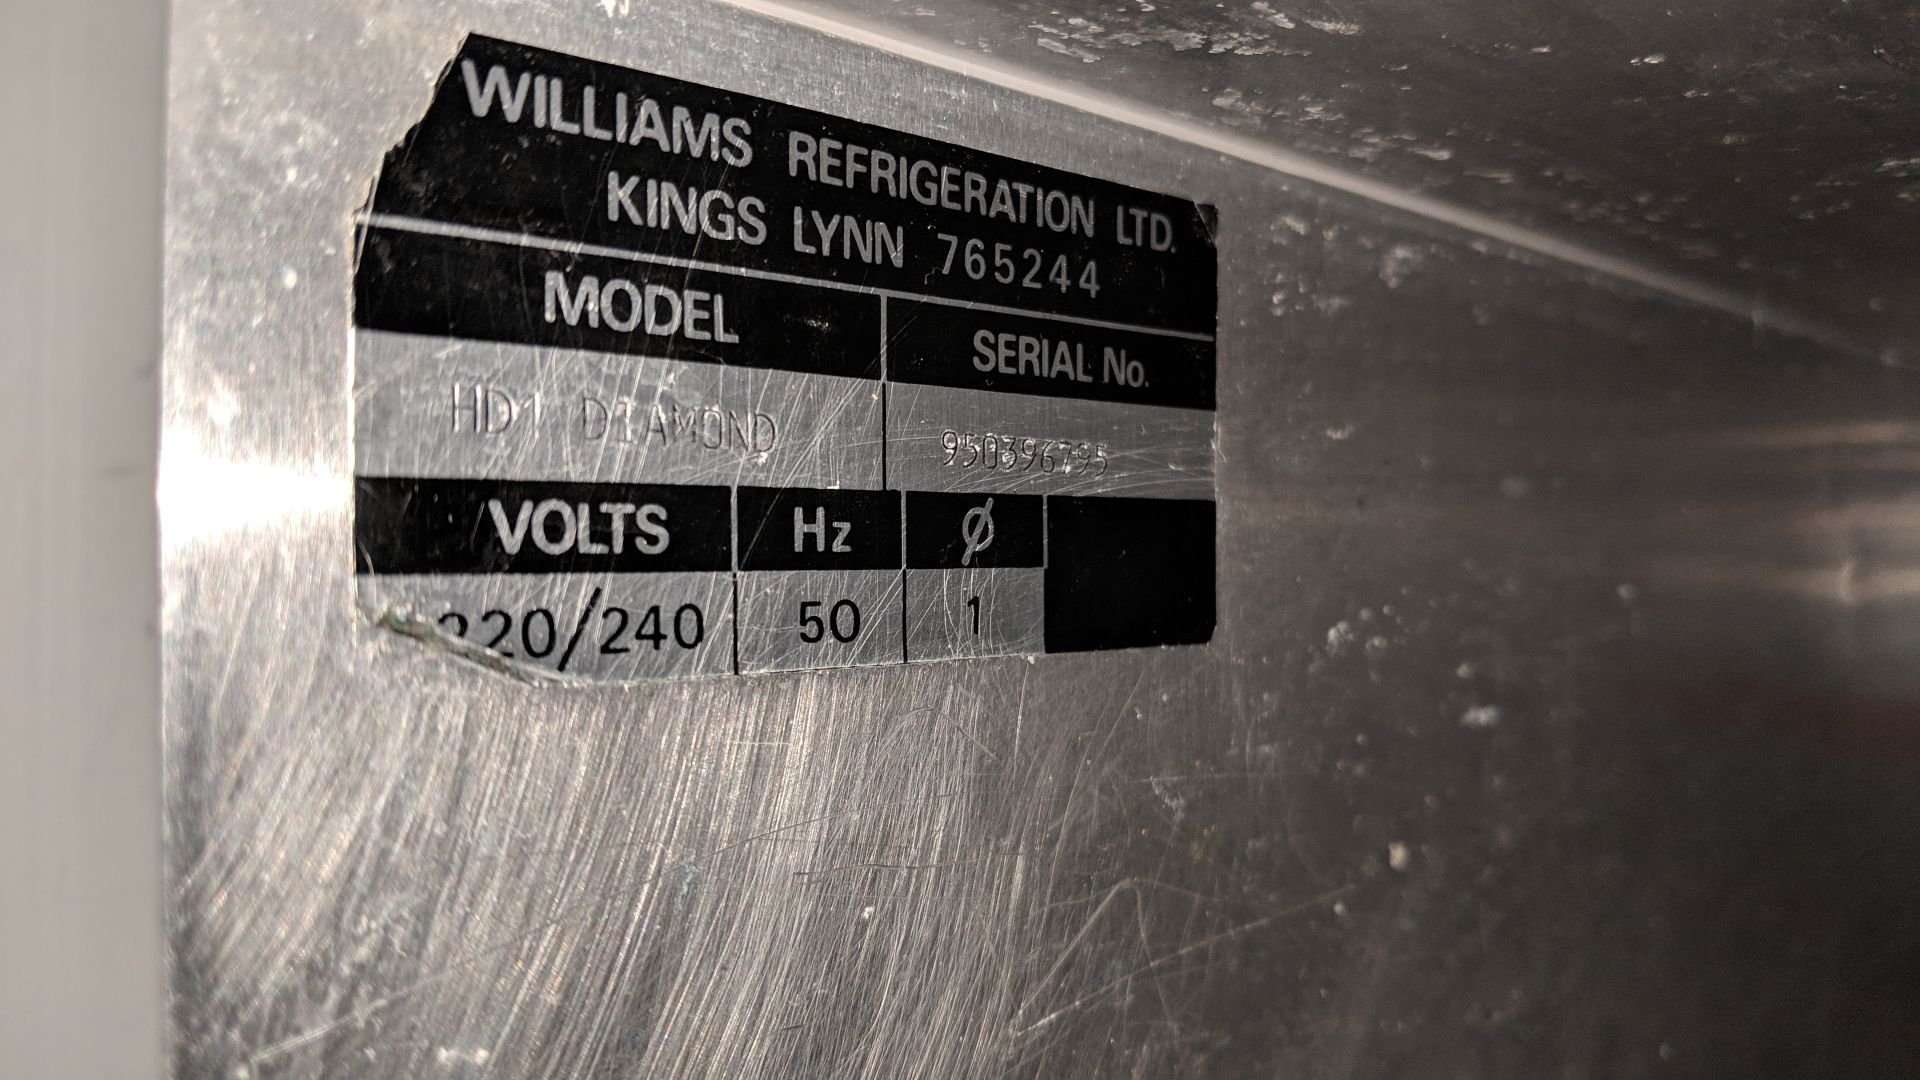 Williams HDI Diamond stainless steel tall fridge IMPORTANT: Please remember goods successfully bid - Image 3 of 3